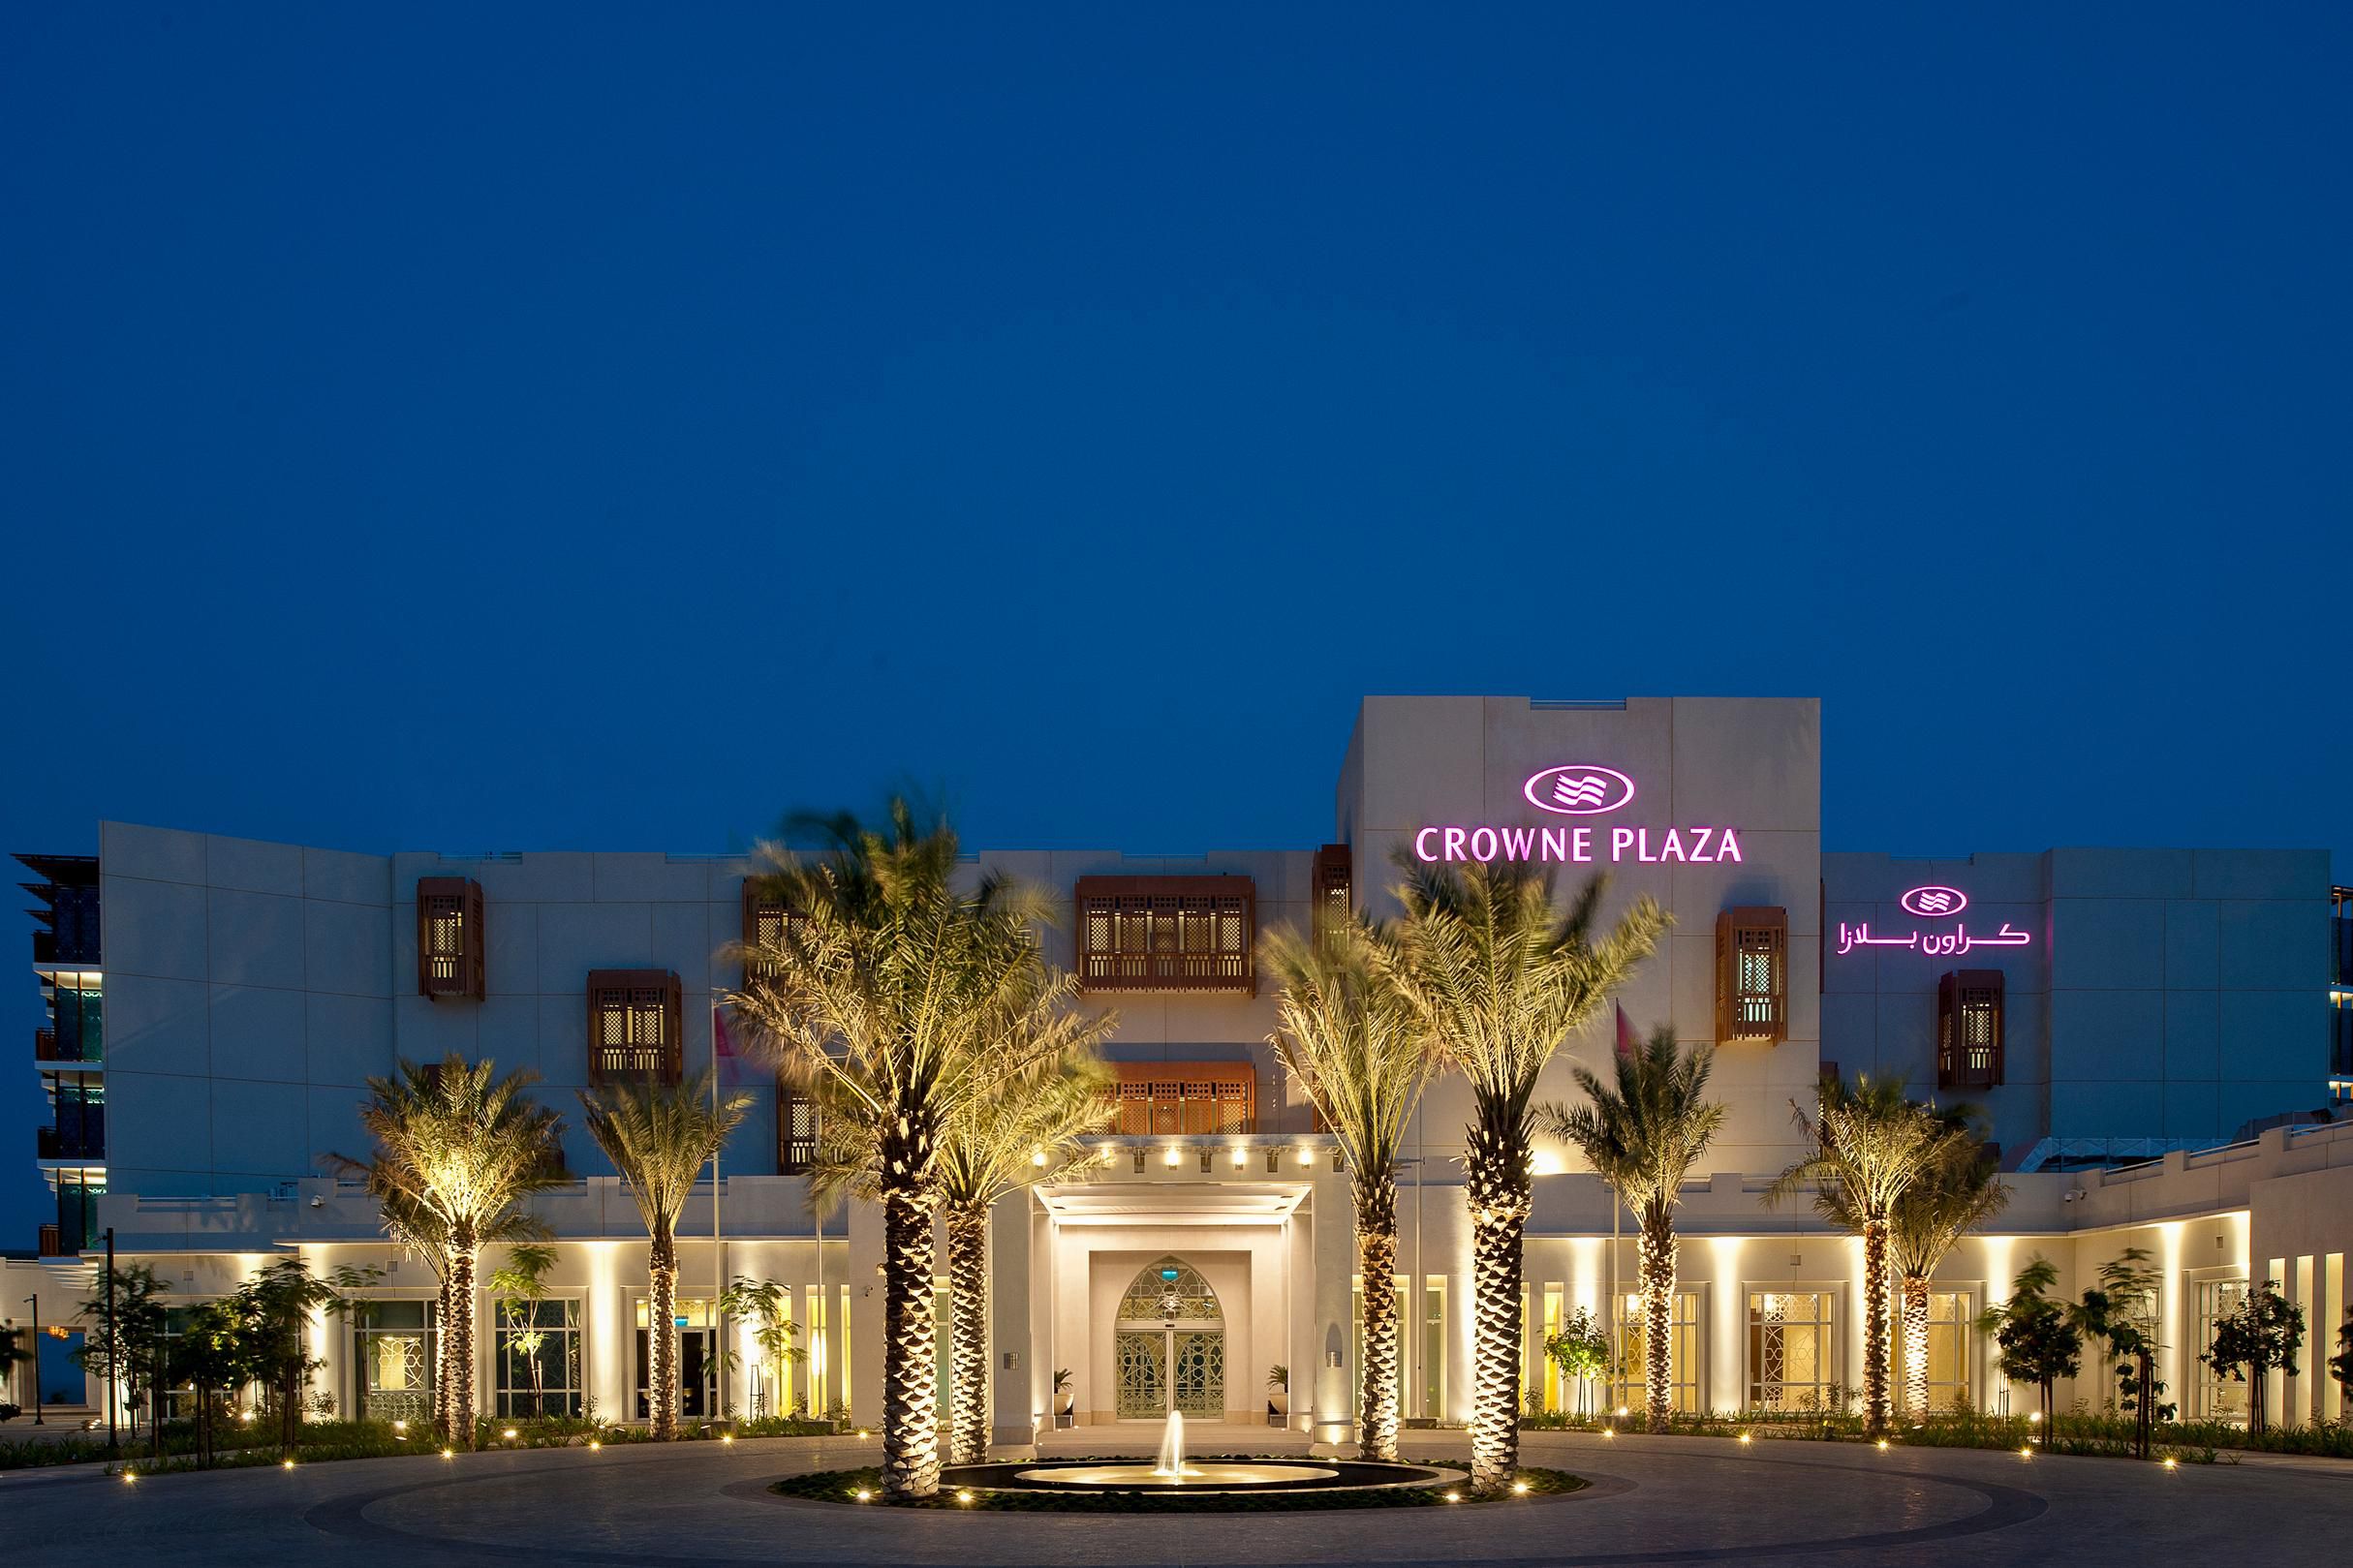 The front of the hotel at night